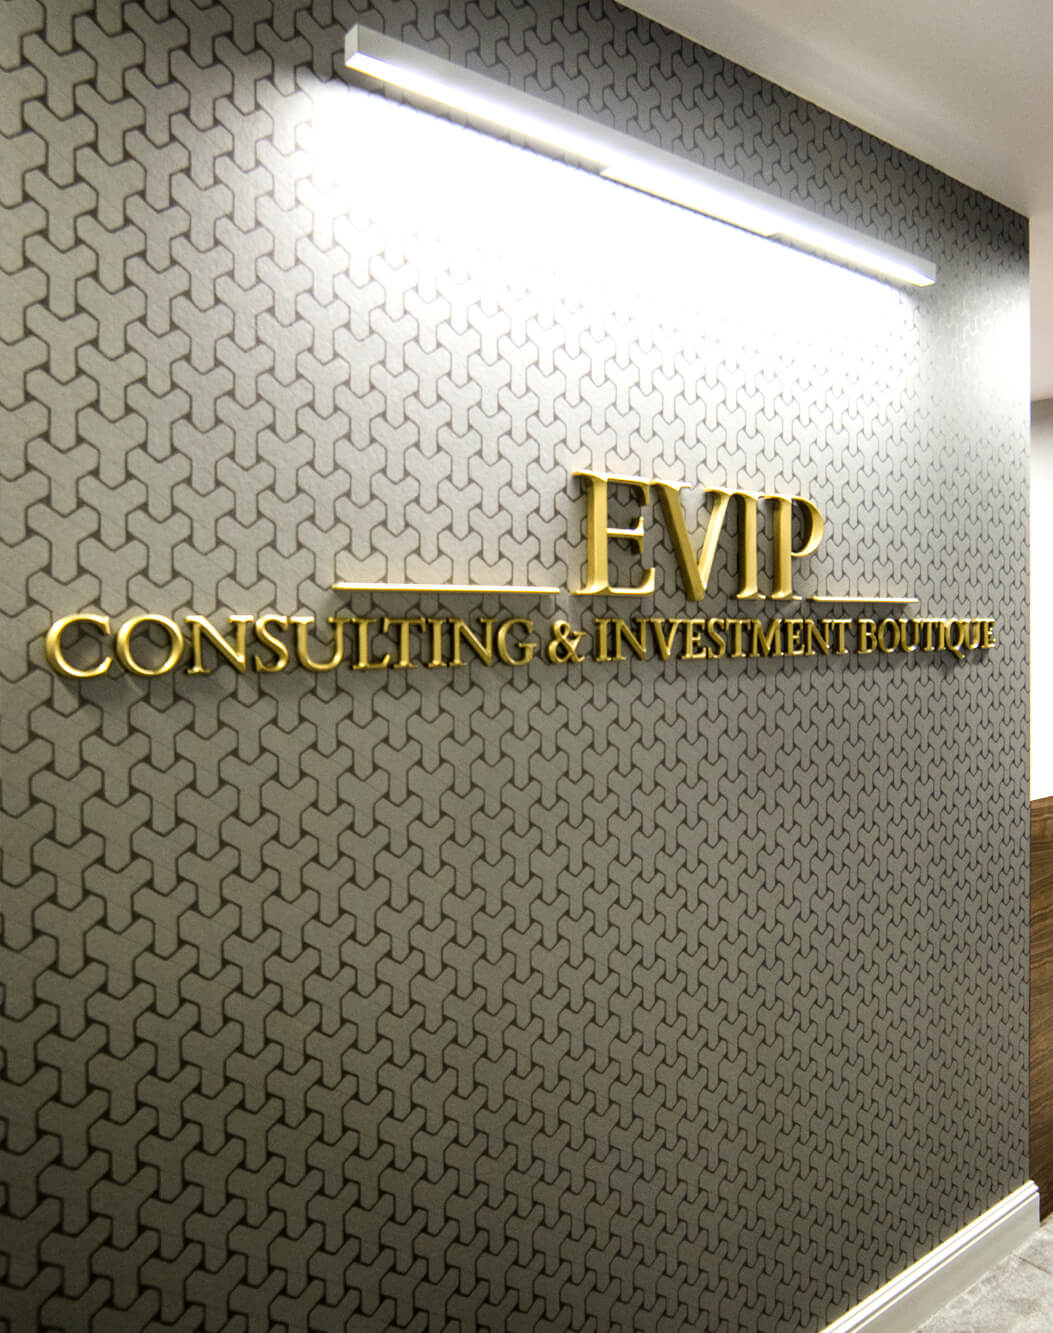 Evip - 3D spatial prismatic letters placed in the lobby